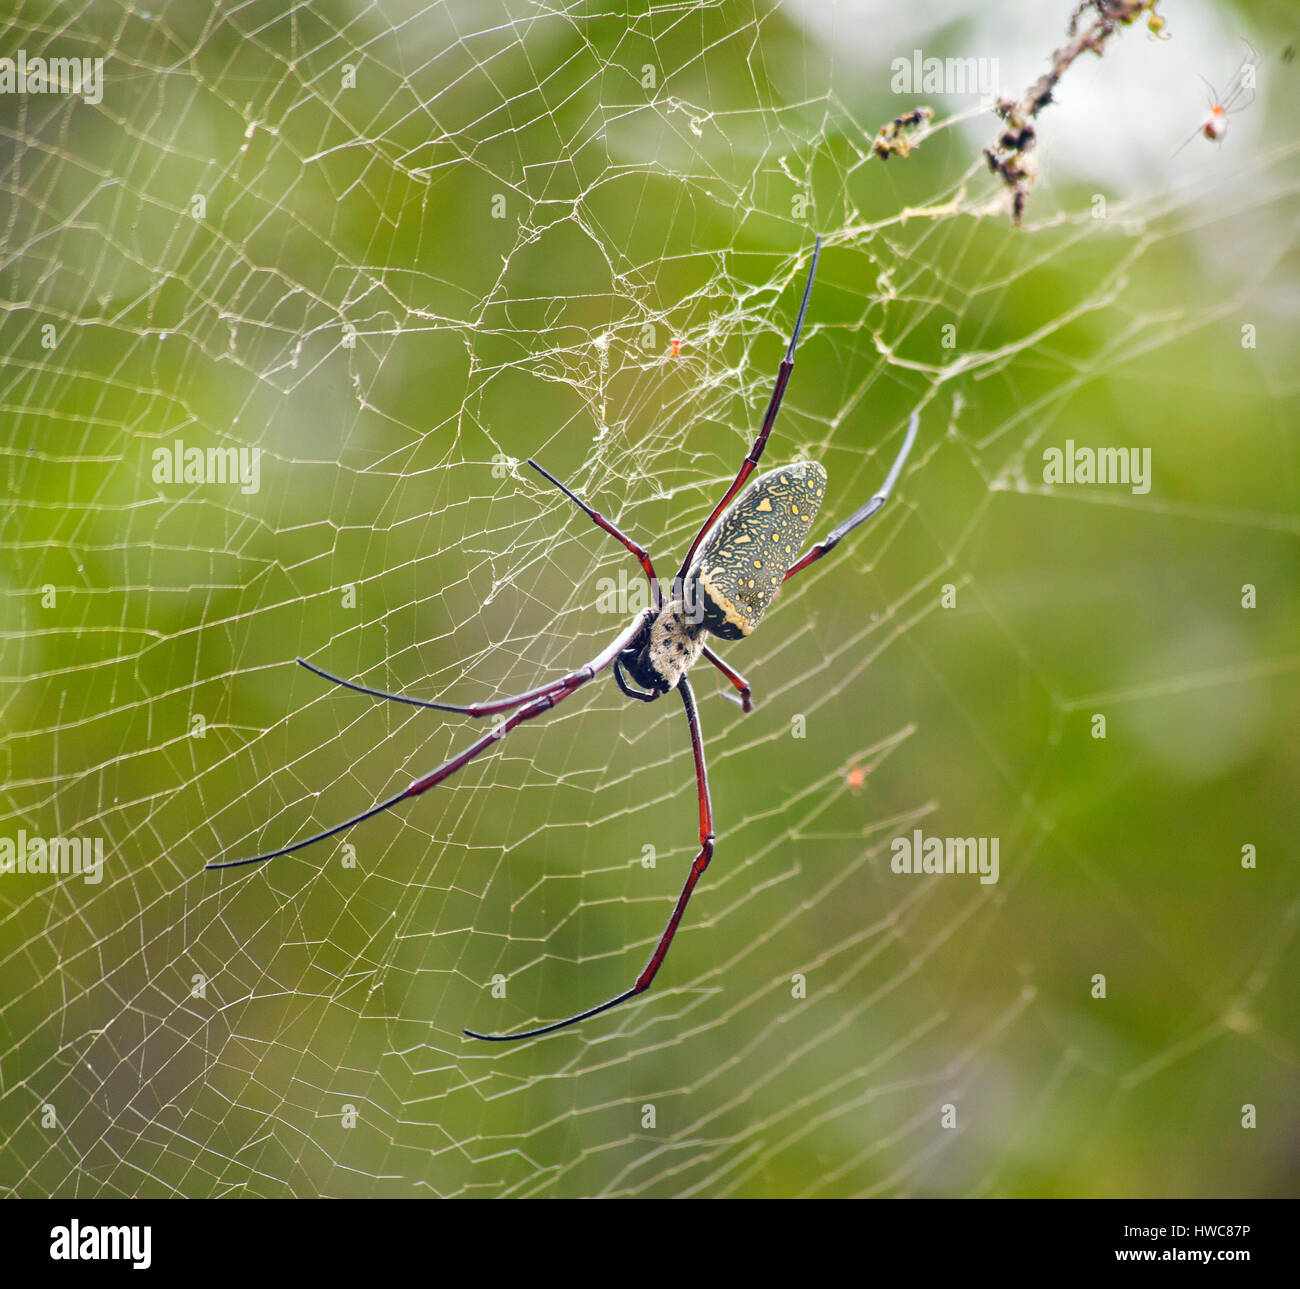 Nephila pilipes (northern golden orb weaver or giant golden orb weaver) is a species of golden orb-web spider. Malaysia Stock Photo